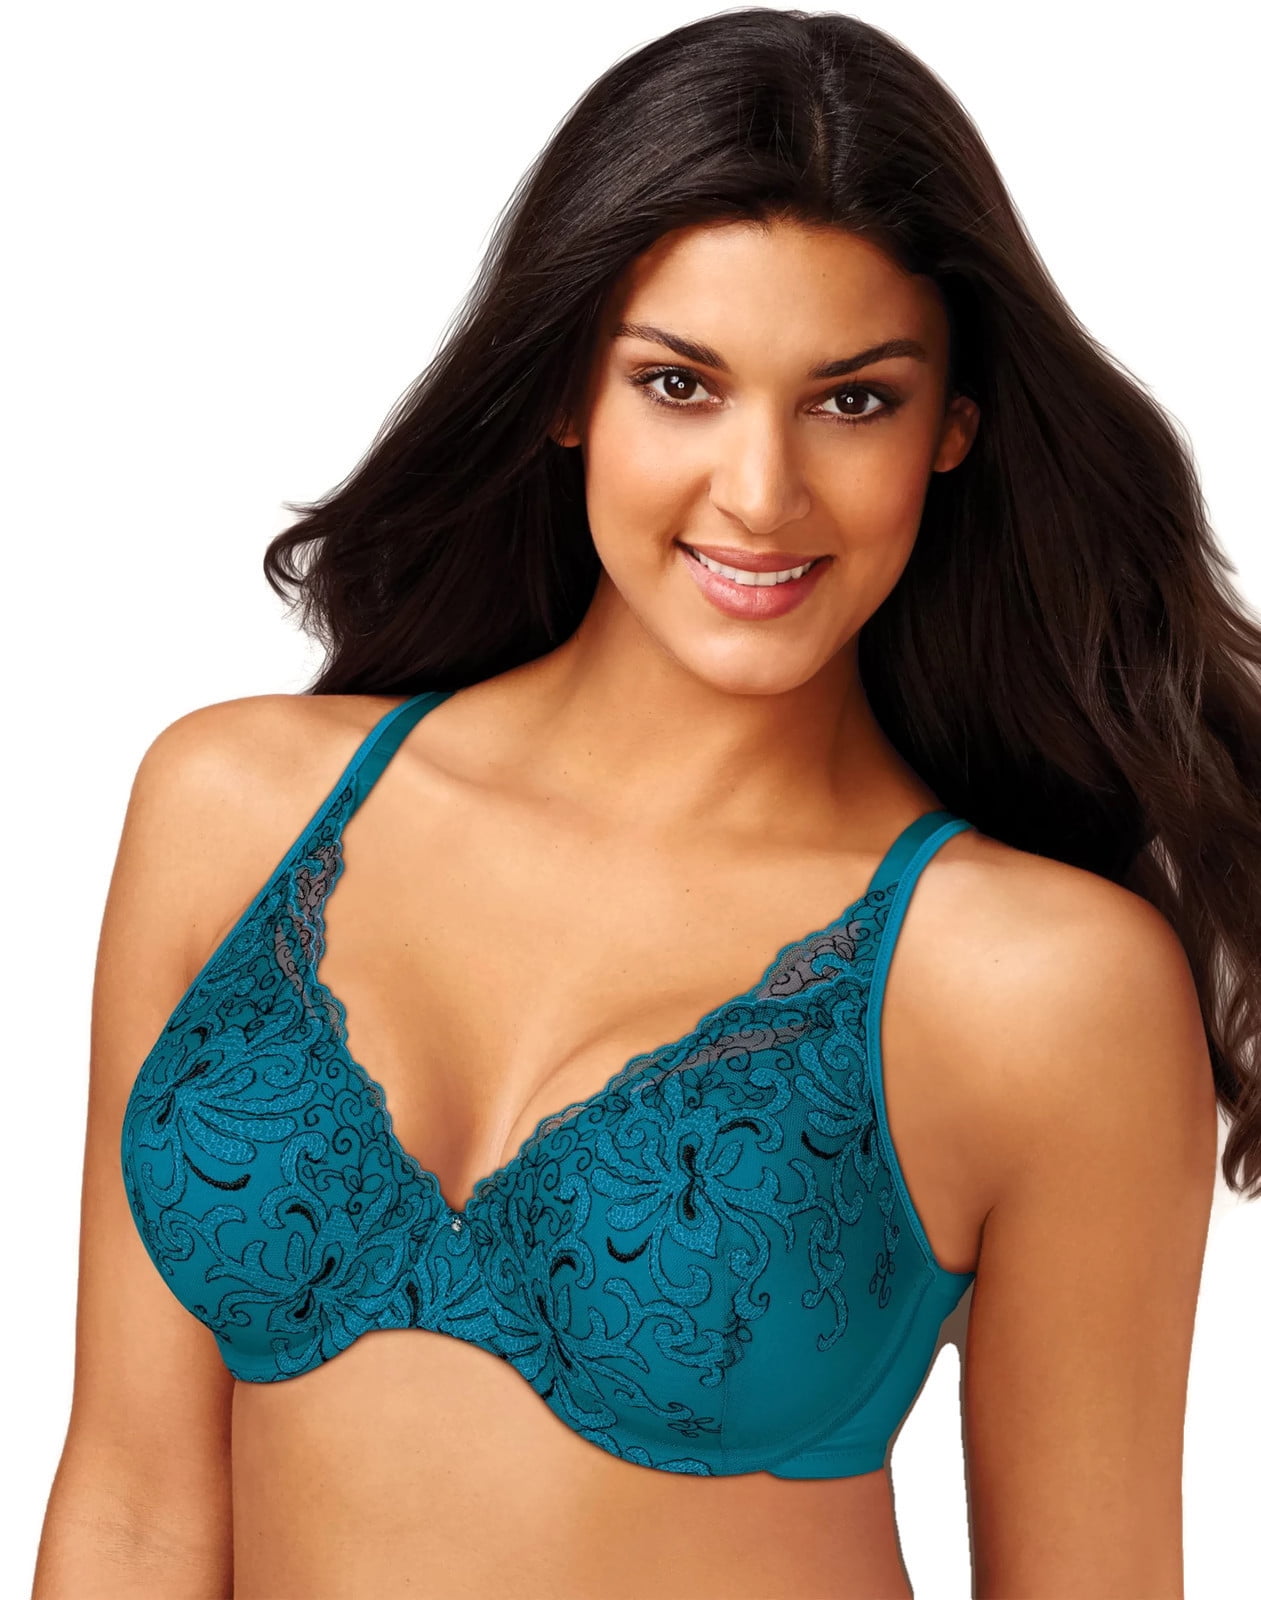 Playtex Secrets Feel Gorgeous® Embroidered Underwire Bra - Size - 40D -  Color - Teal Tide/Black 